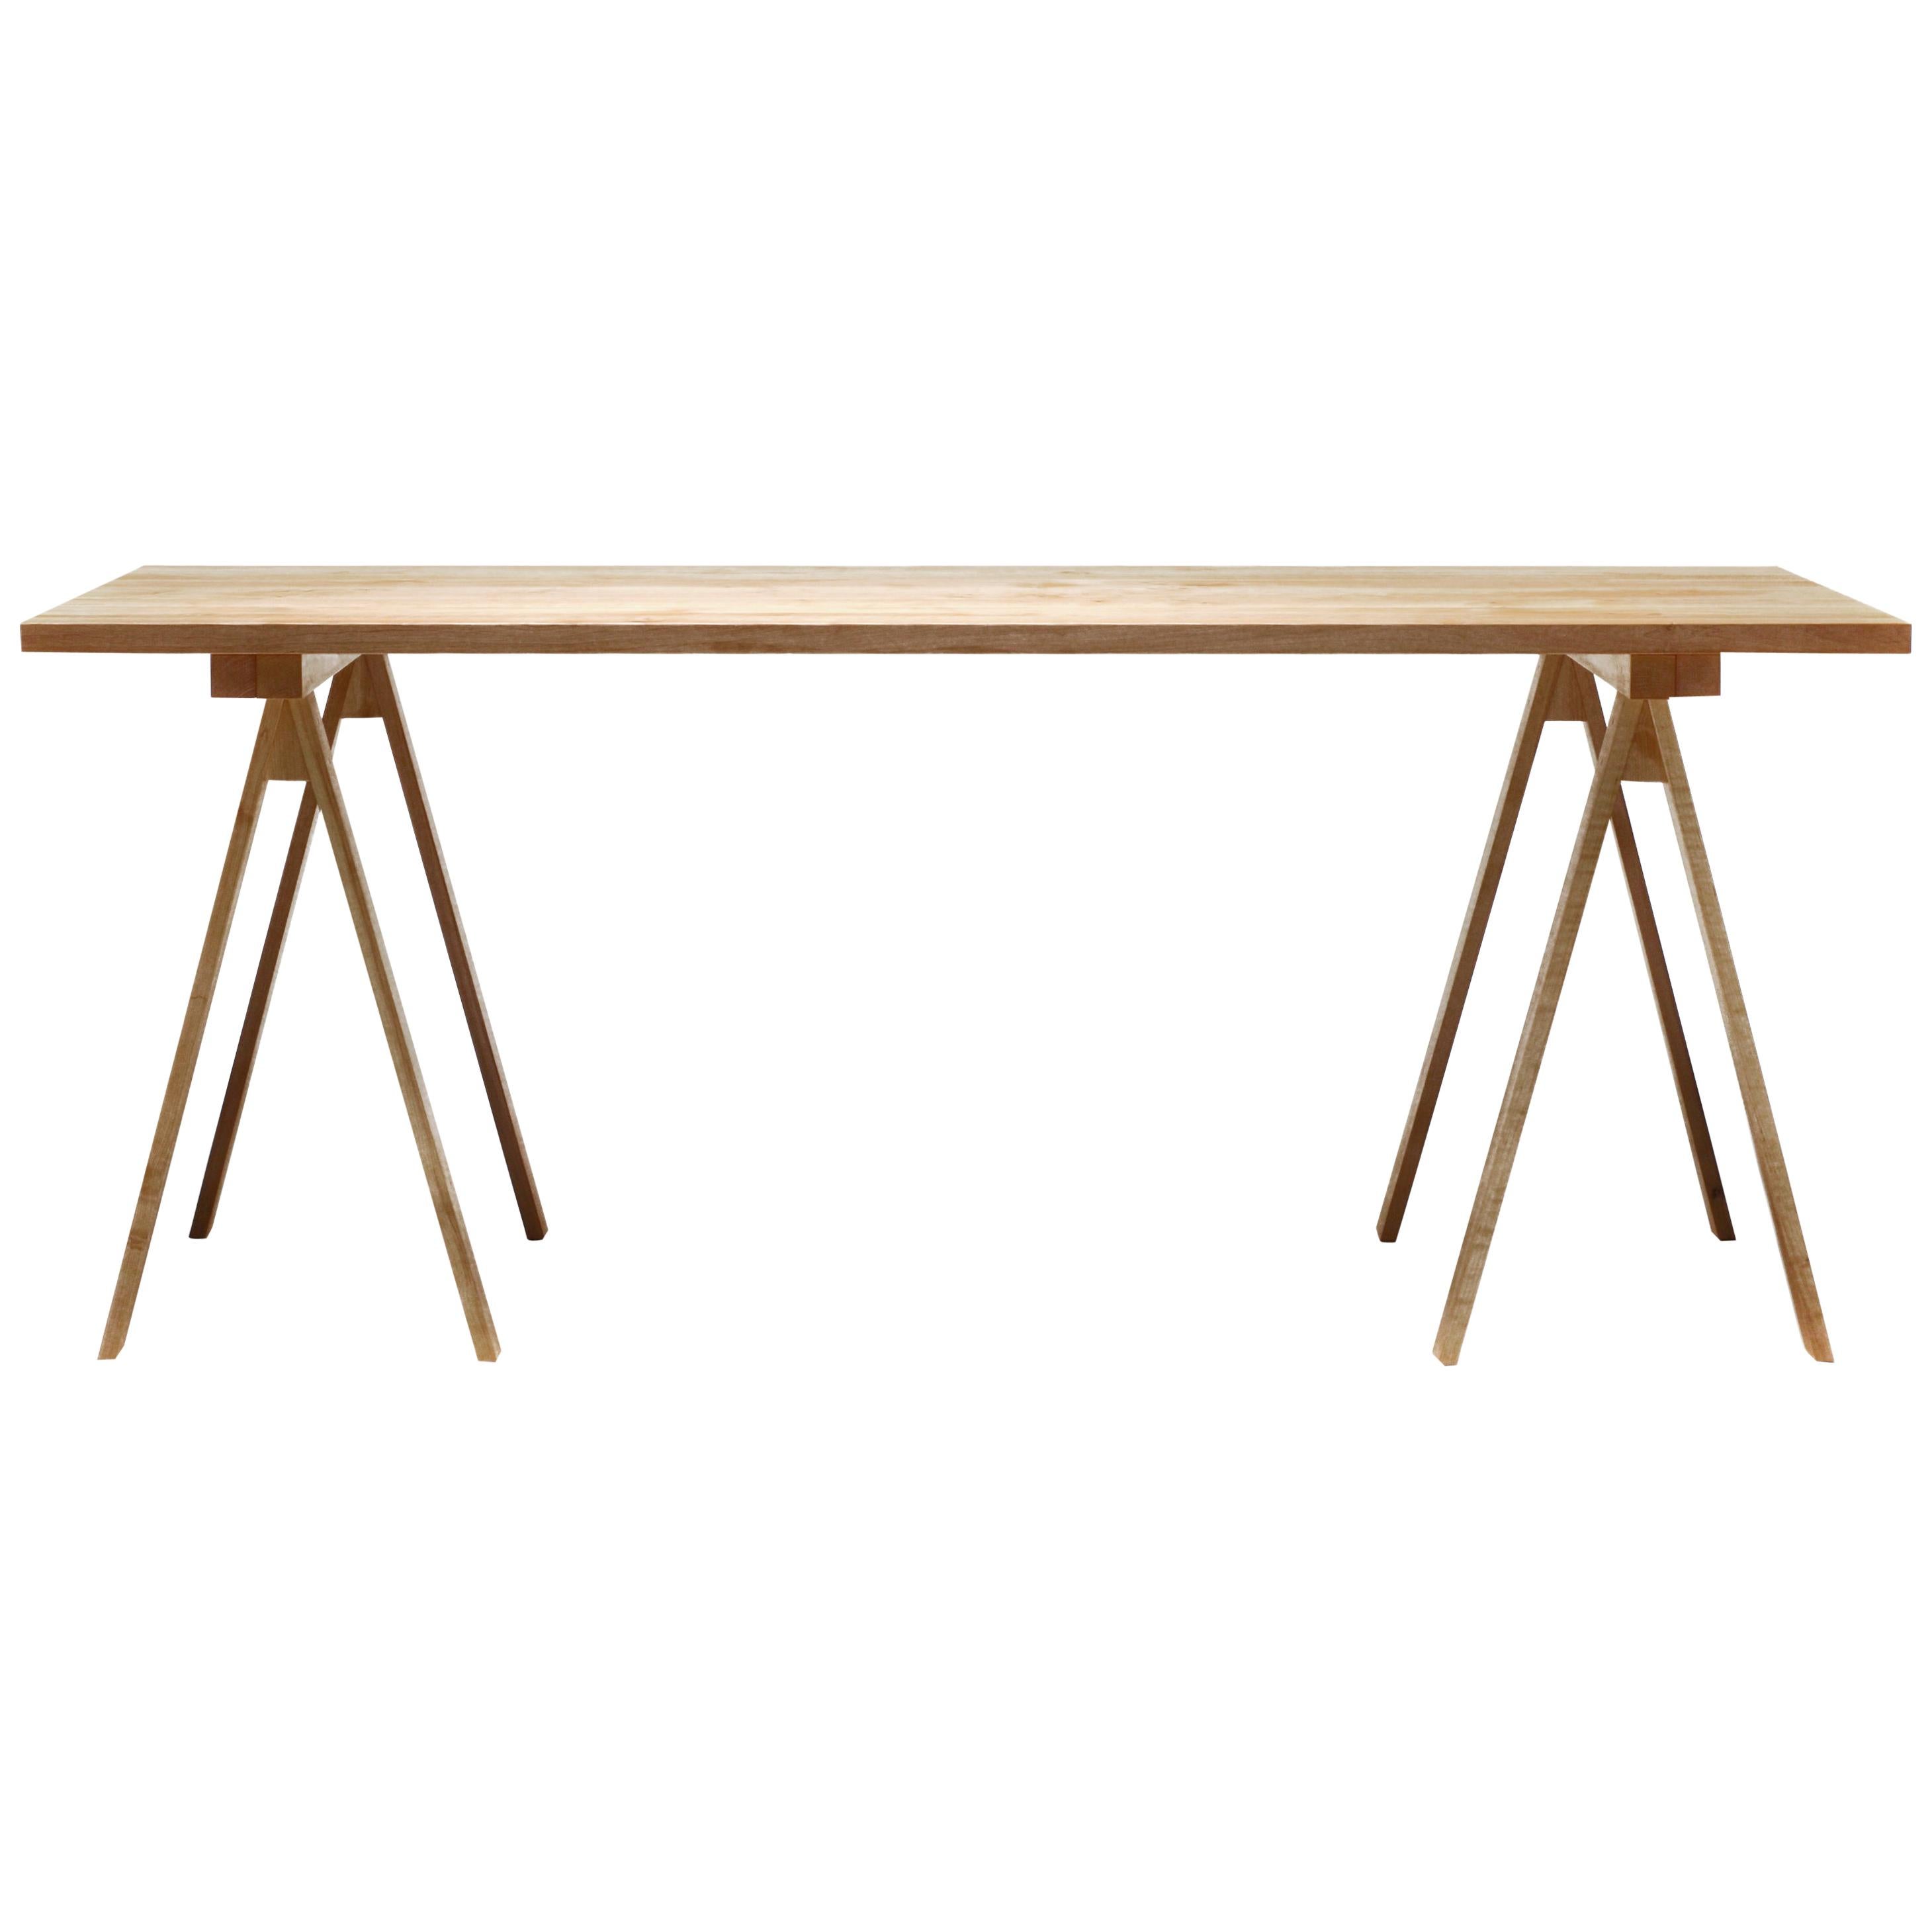 Arkitecture Table Top in Birch by Kari Virtanen For Sale